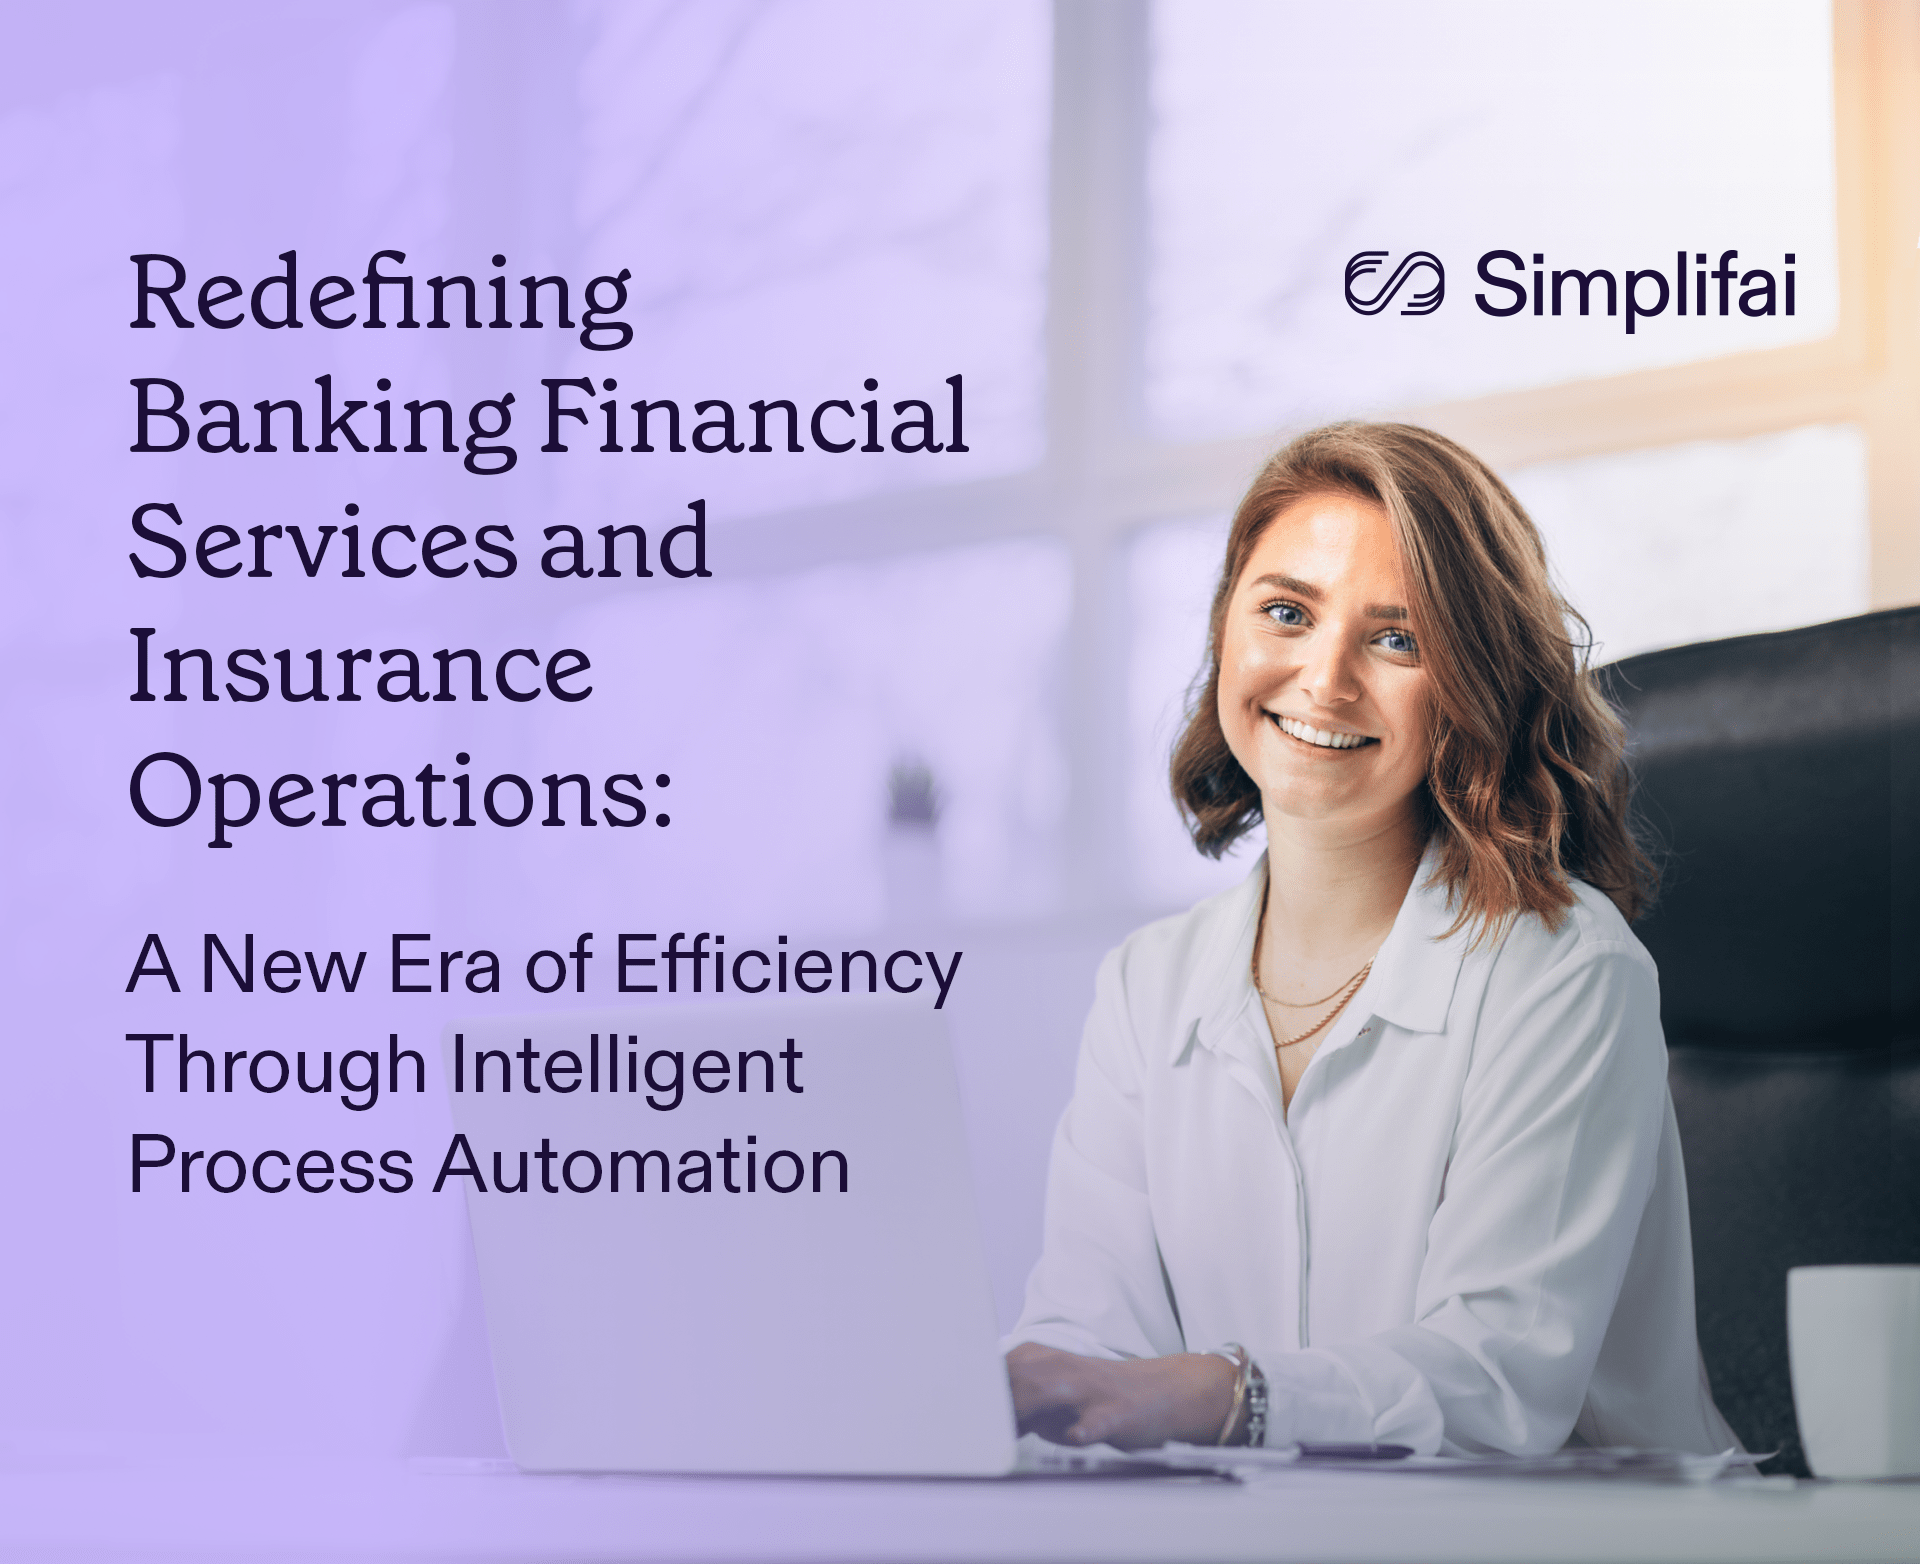 Redefining Banking Financial Services and Insurance Operations: A New Era of Efficiency Through Intelligent Process Automation